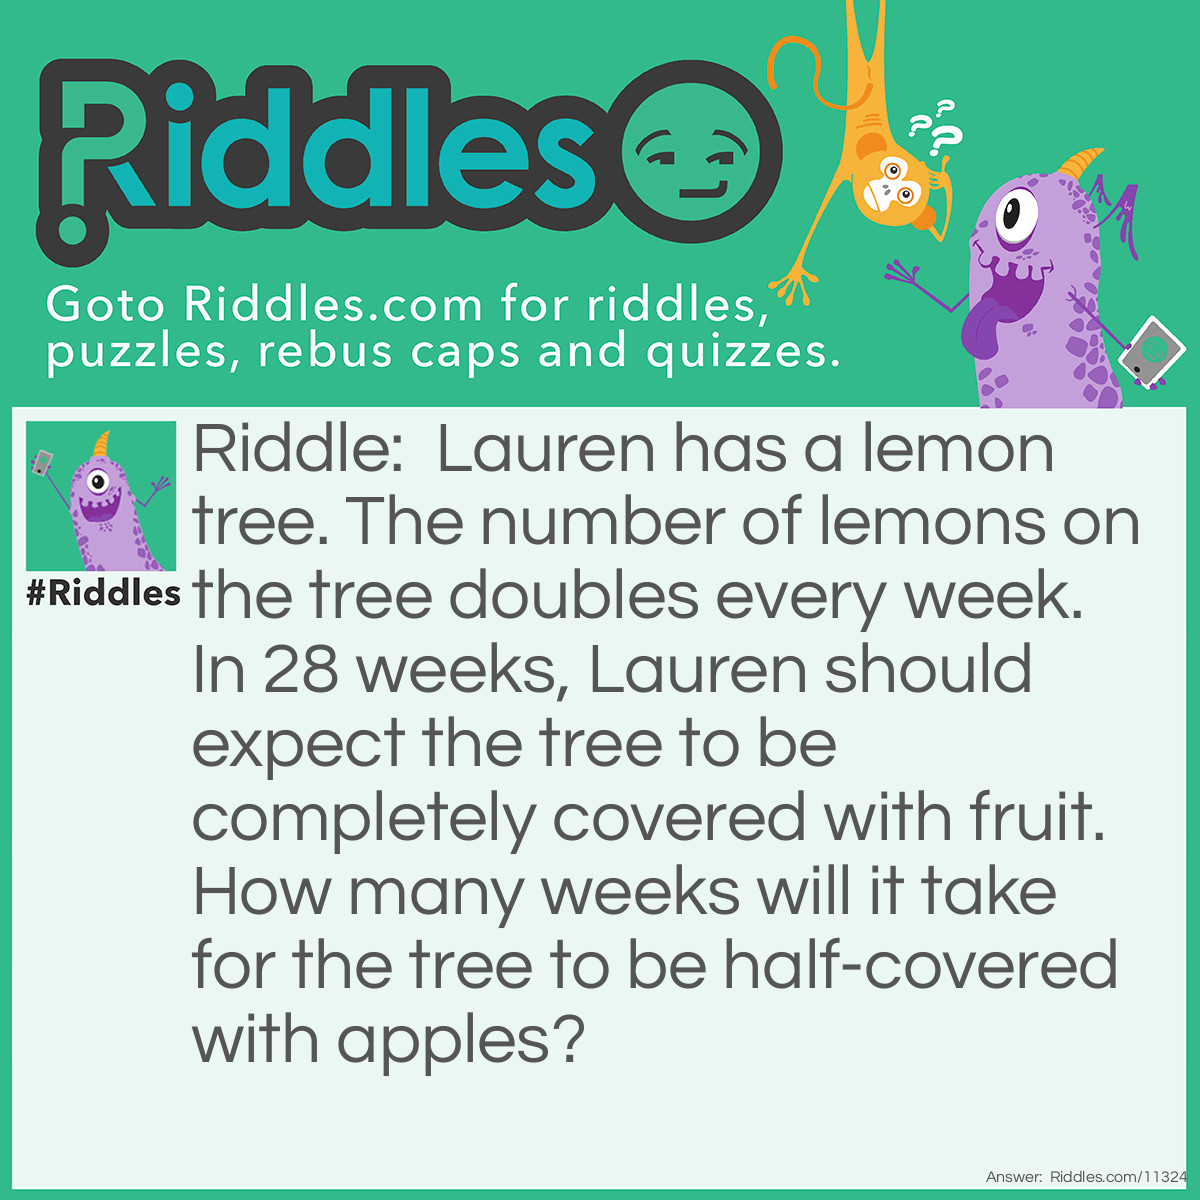 Riddle: Lauren has a lemon tree. The number of lemons on the tree doubles every week. In 28 weeks, Lauren should expect the tree to be completely covered with fruit. How many weeks will it take for the tree to be half-covered with apples? Answer: Zero. If I asked you about lemons, the answer would be 27 weeks because the number of lemons on Lauren's tree doubles every week. However, I asked you about APPLES, and they don't grow on lemon trees; therefore, the answer is zero.